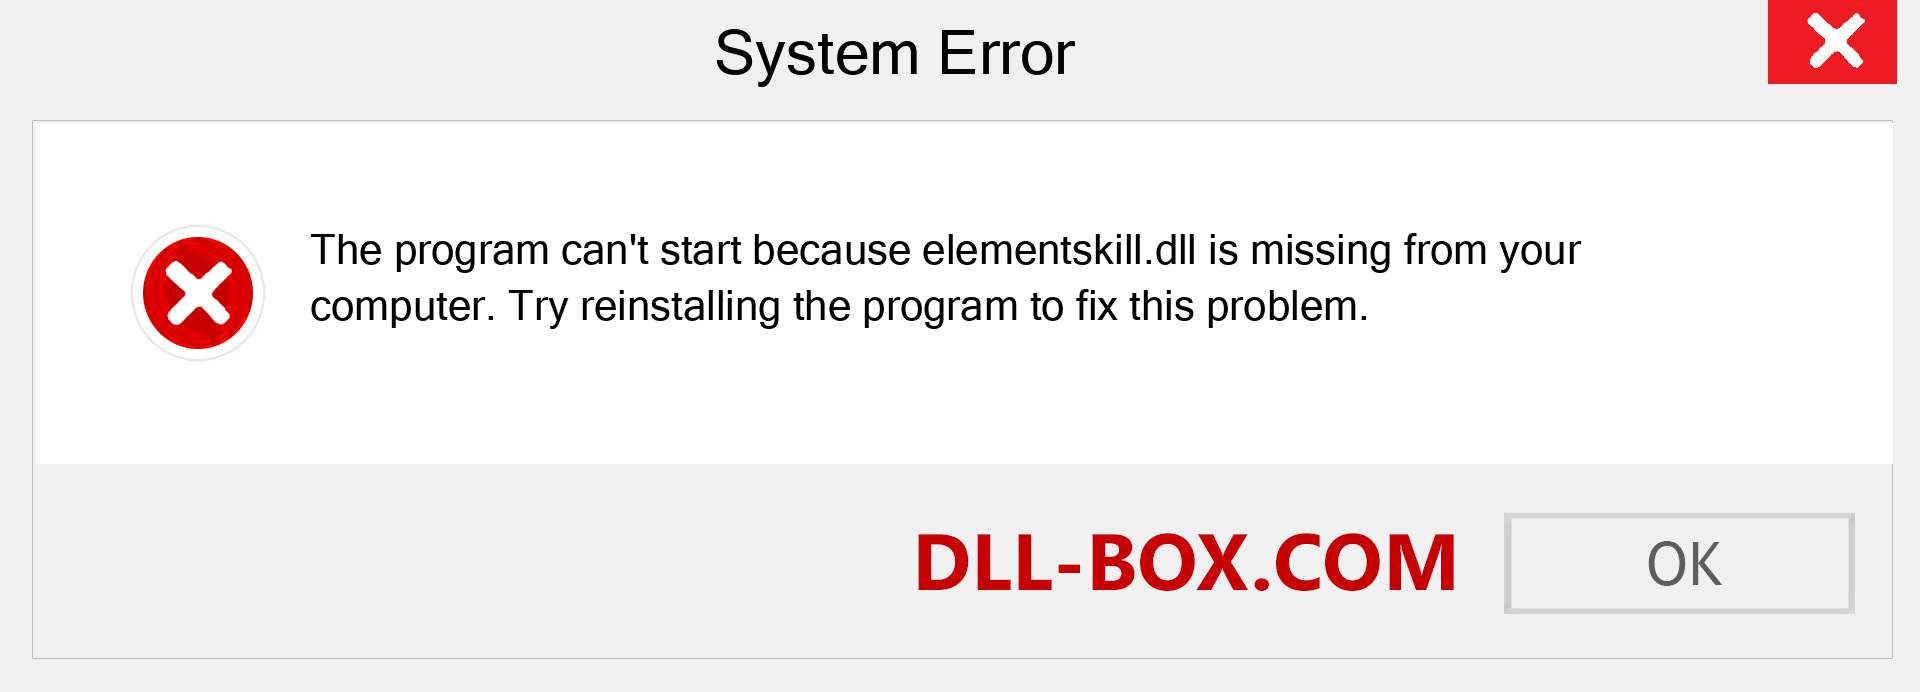  elementskill.dll file is missing?. Download for Windows 7, 8, 10 - Fix  elementskill dll Missing Error on Windows, photos, images